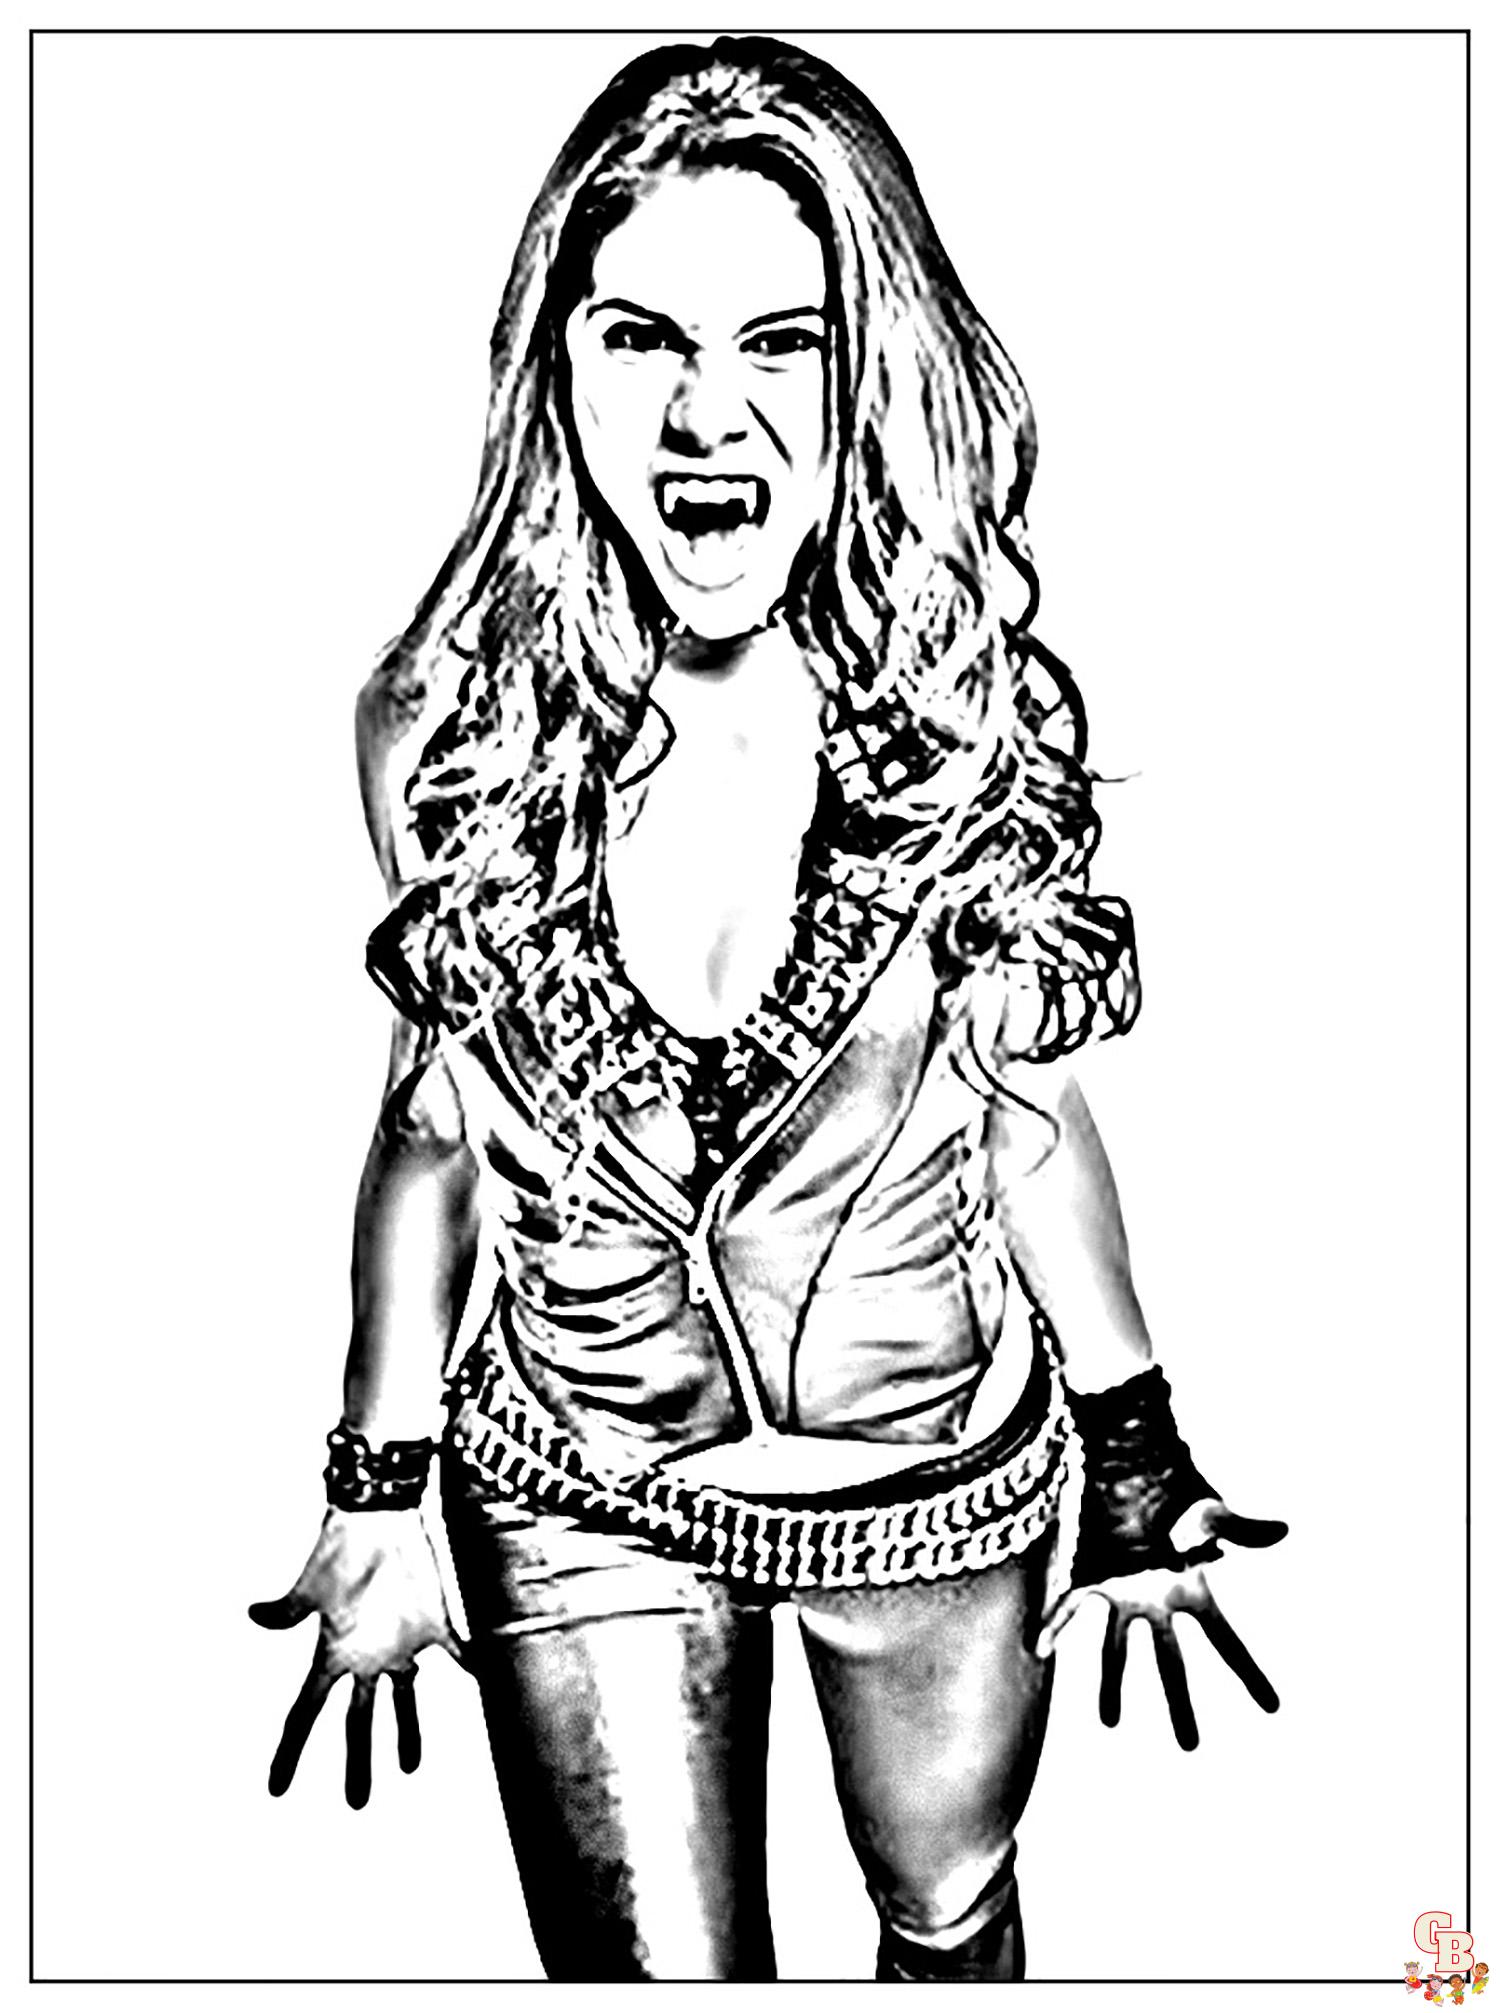 Chica Vampiro Coloring Page